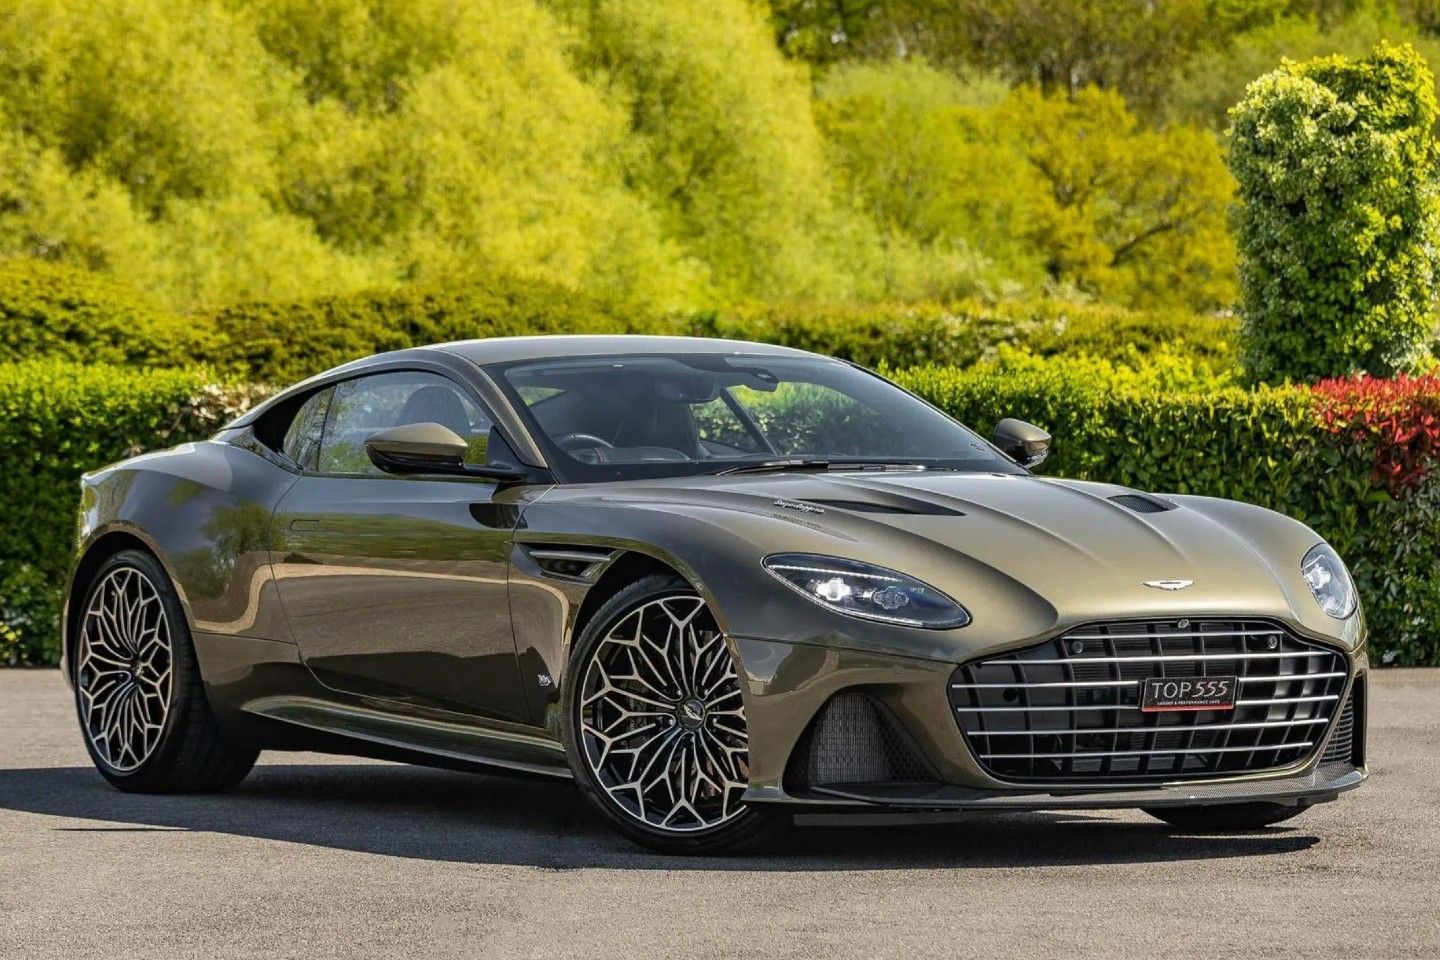 Sublime Aston Martin DBS OHMSS Edition for sale - PistonHeads UK